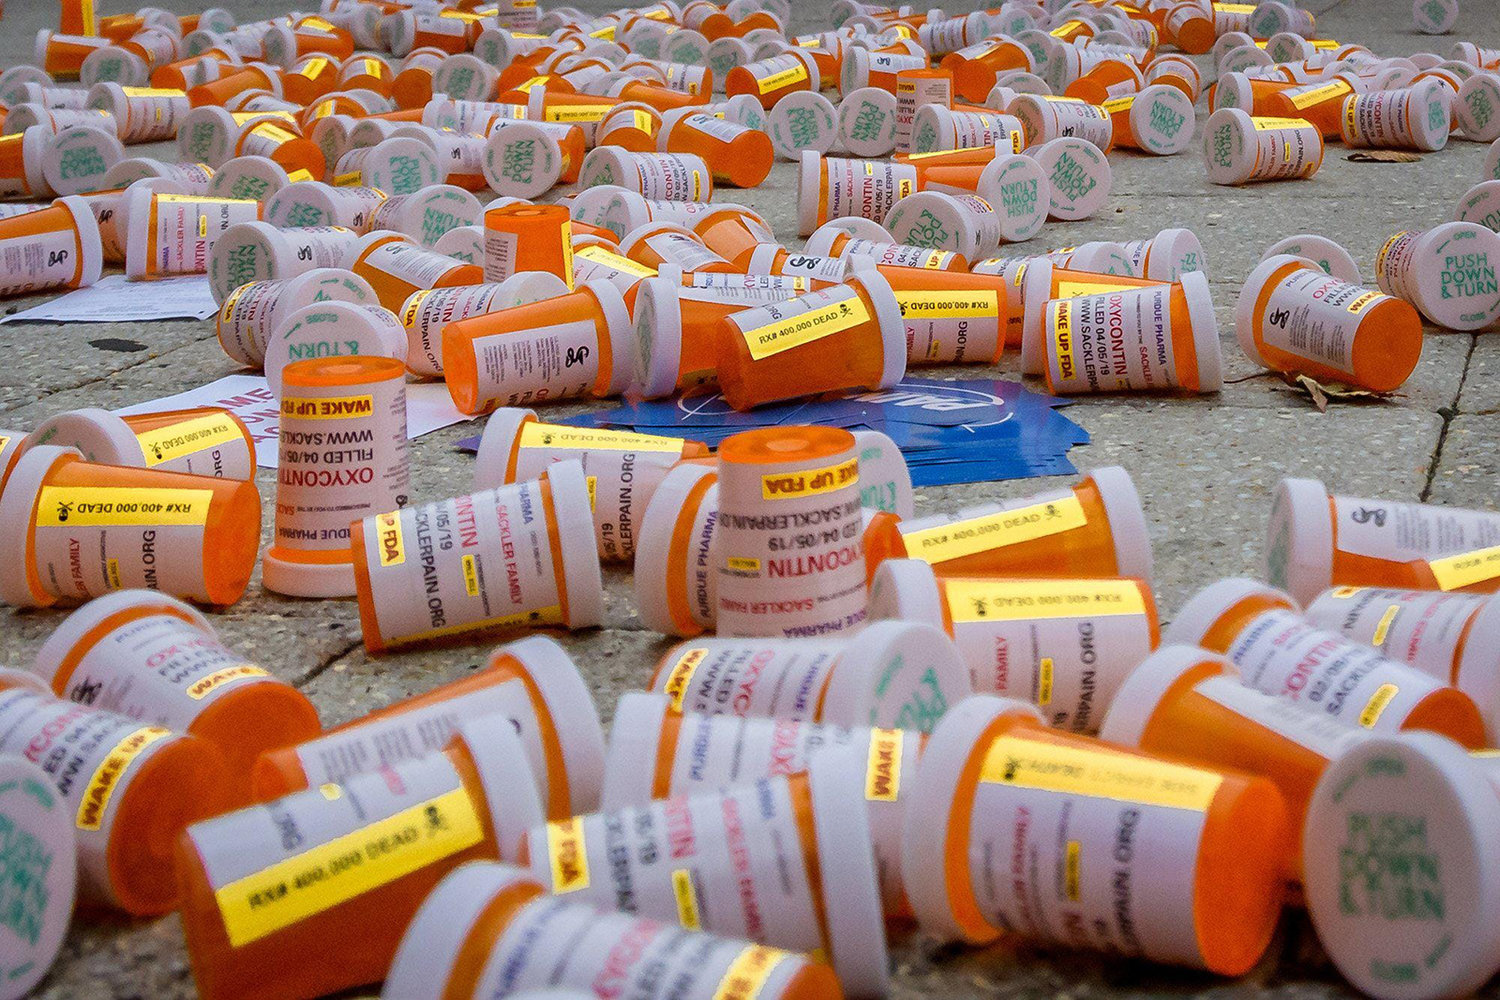 New Centers for Disease Control and Prevention data published Wednesday suggest that a projected 100,306 individuals died from drug overdoses over the 12-month period ending in April, a 28.5% increase over the previous 12-month period. (Erik McGregor/Zuma Press/TNS)